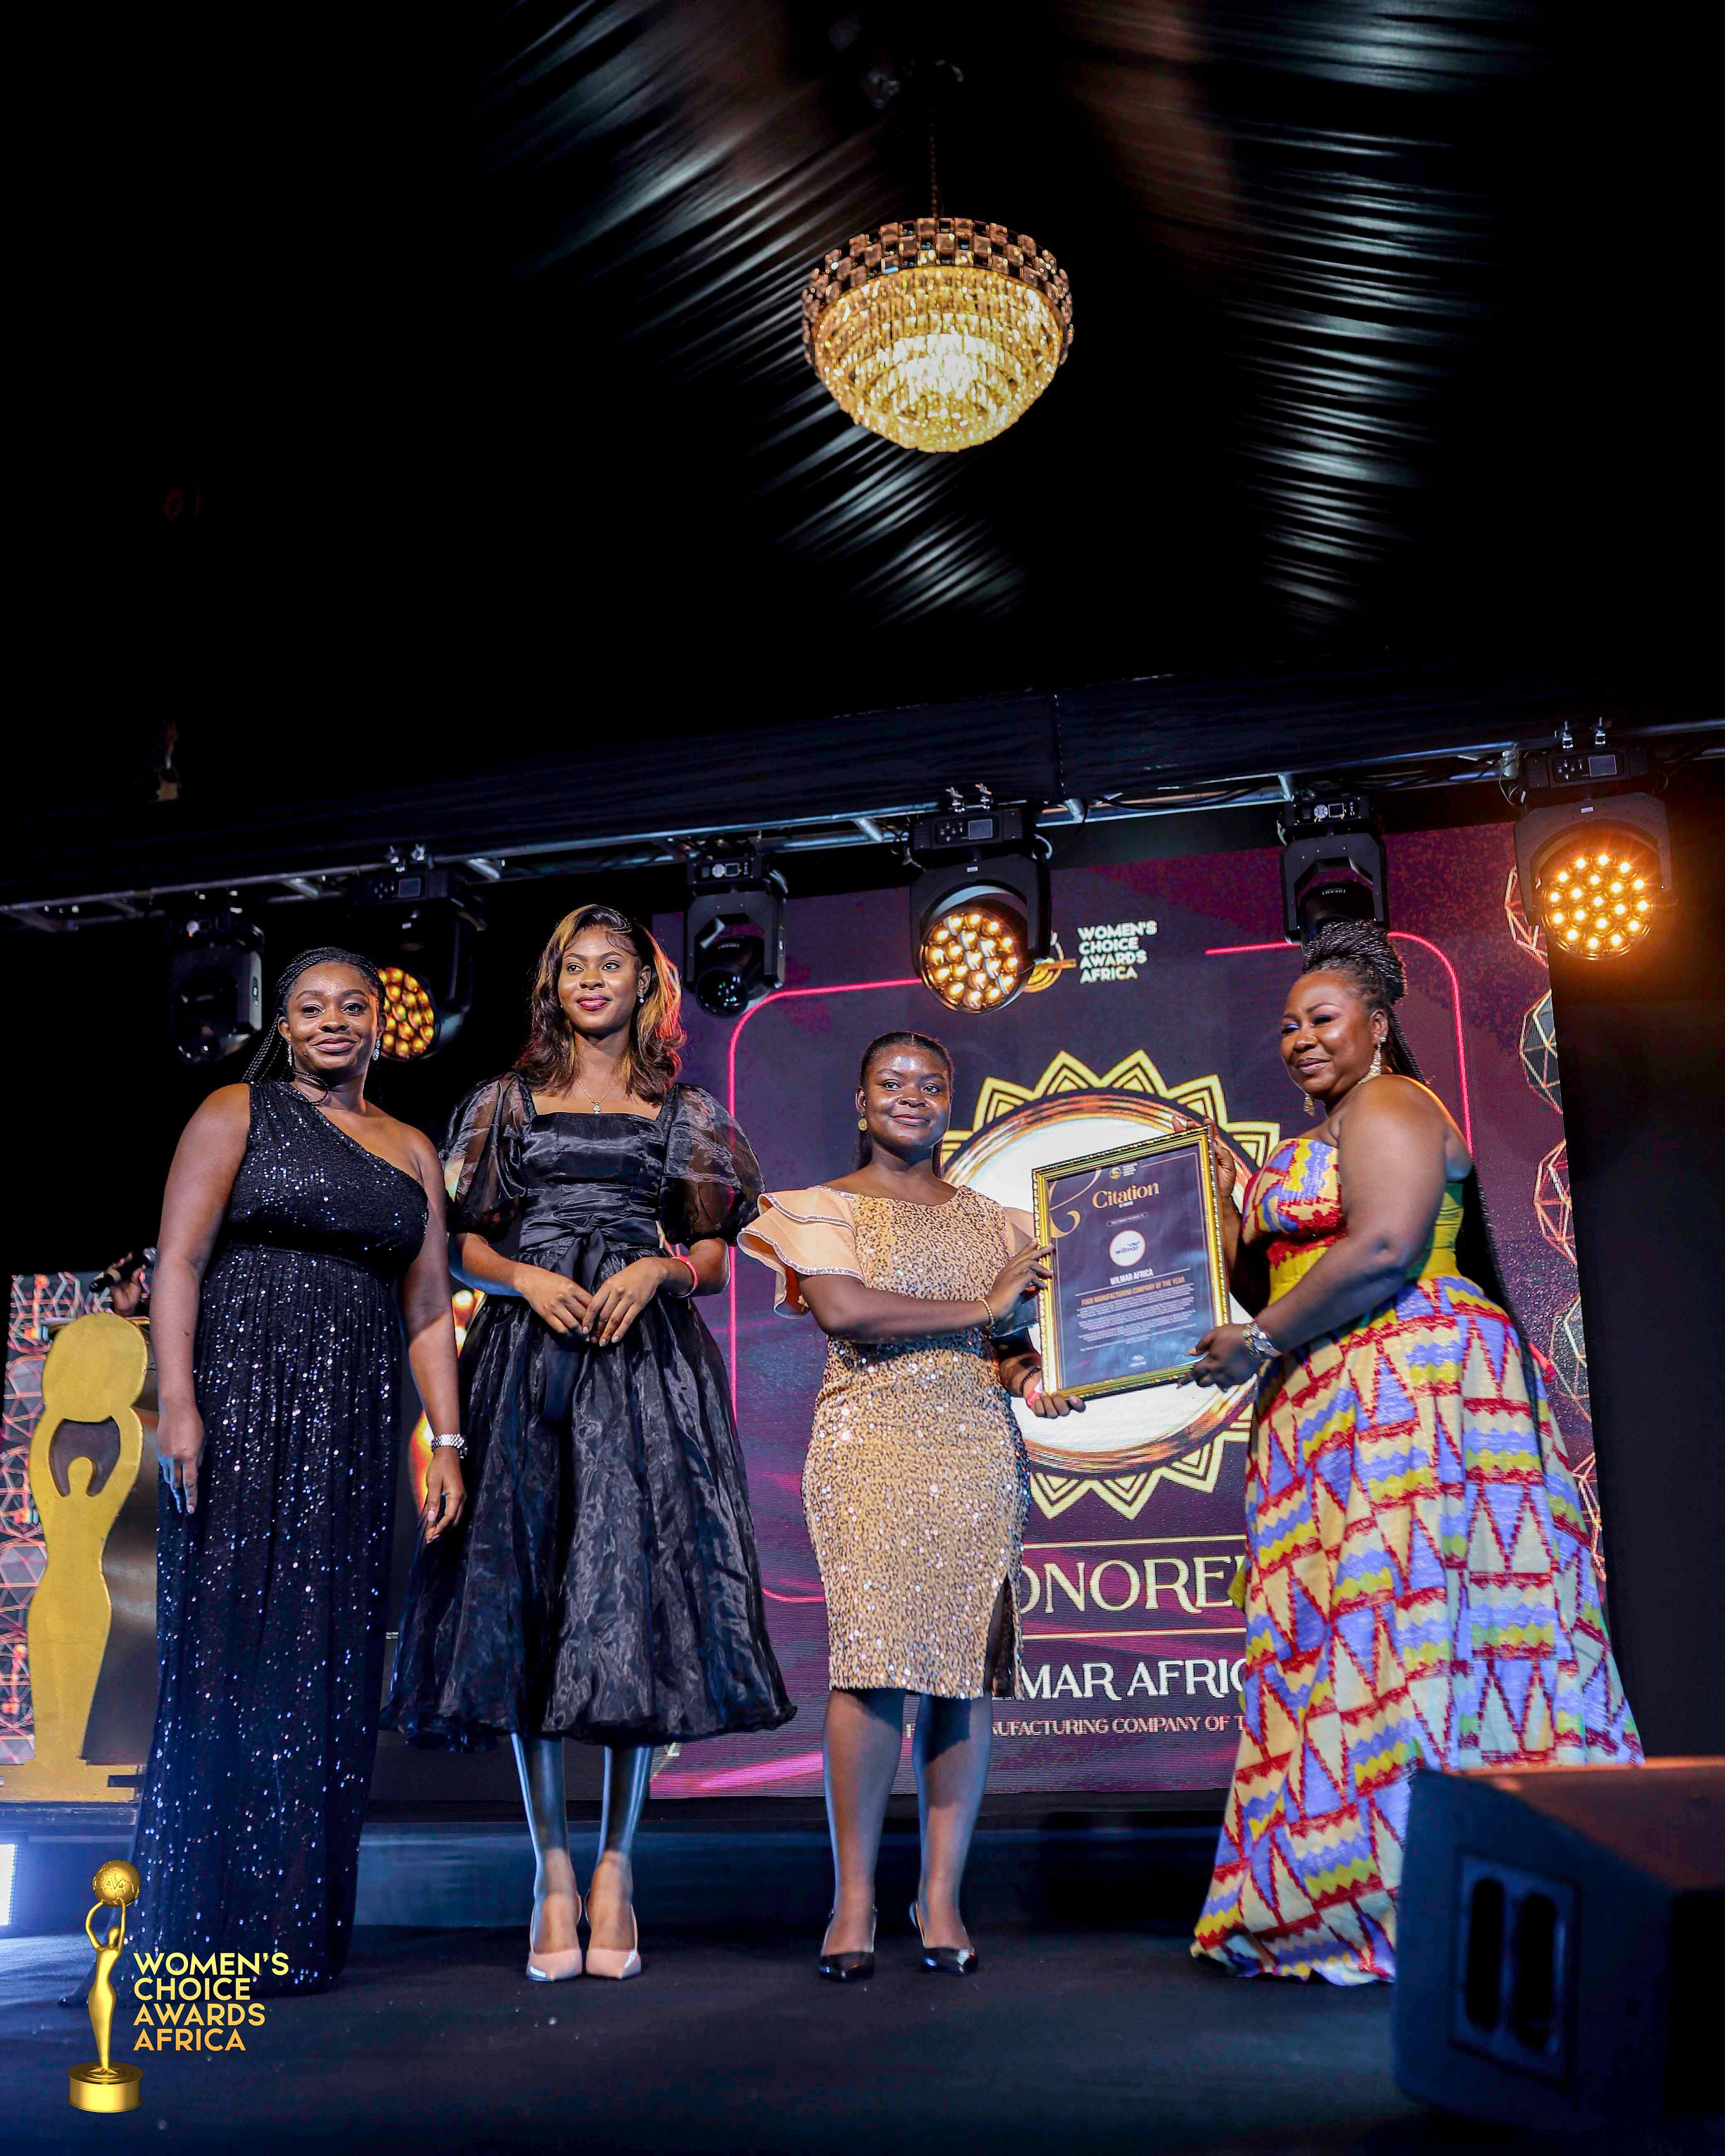 Wilmar Africa Ltd. sweeps top honours as Food Manufacturing Company of the Year and Frytol Food Brand of the Year